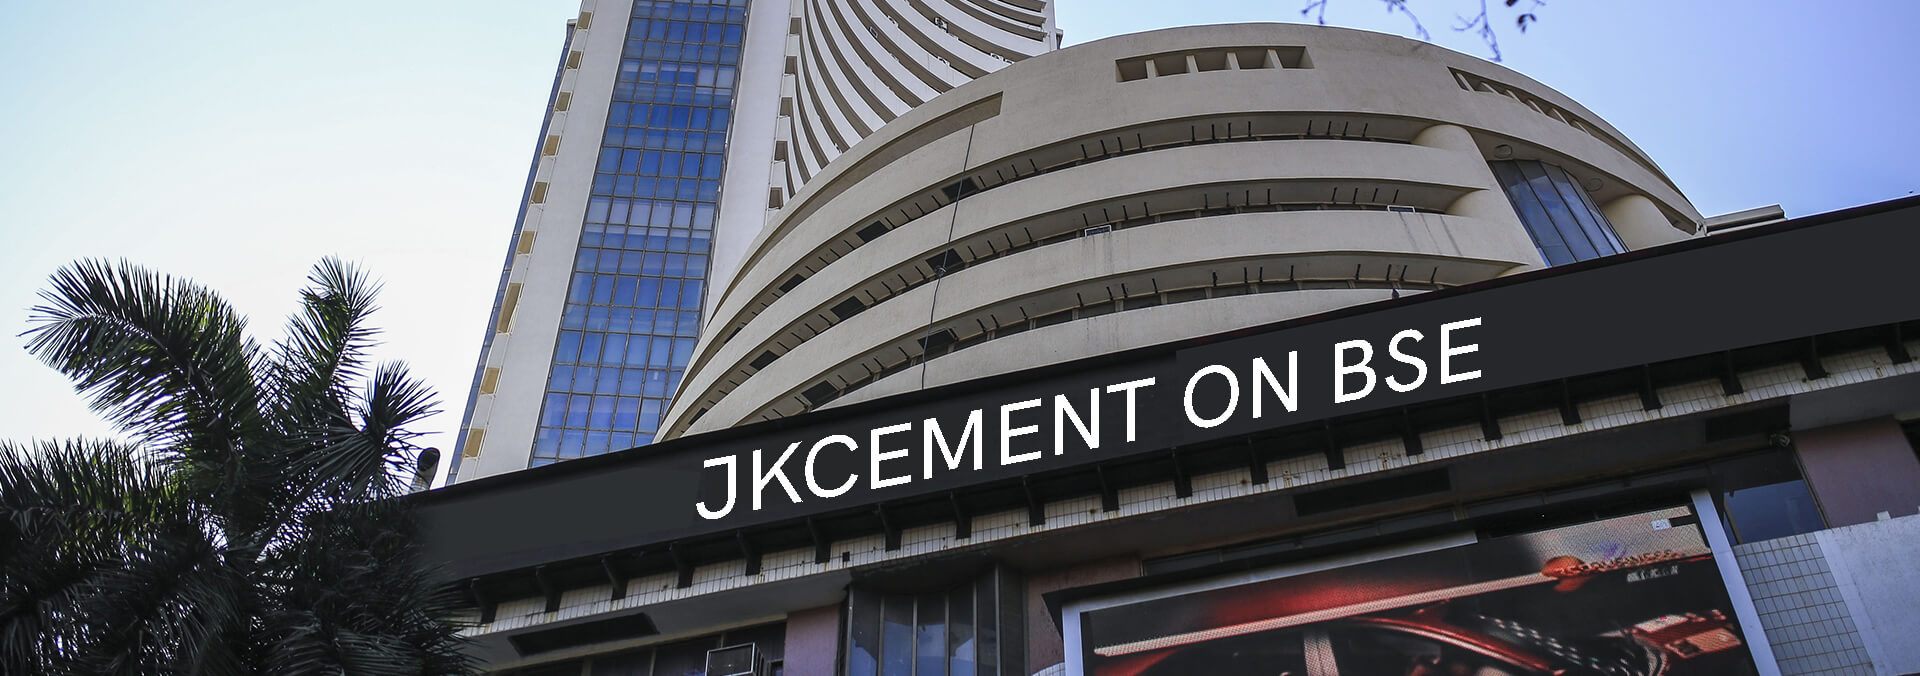 Investor Relations JKCement on BSE